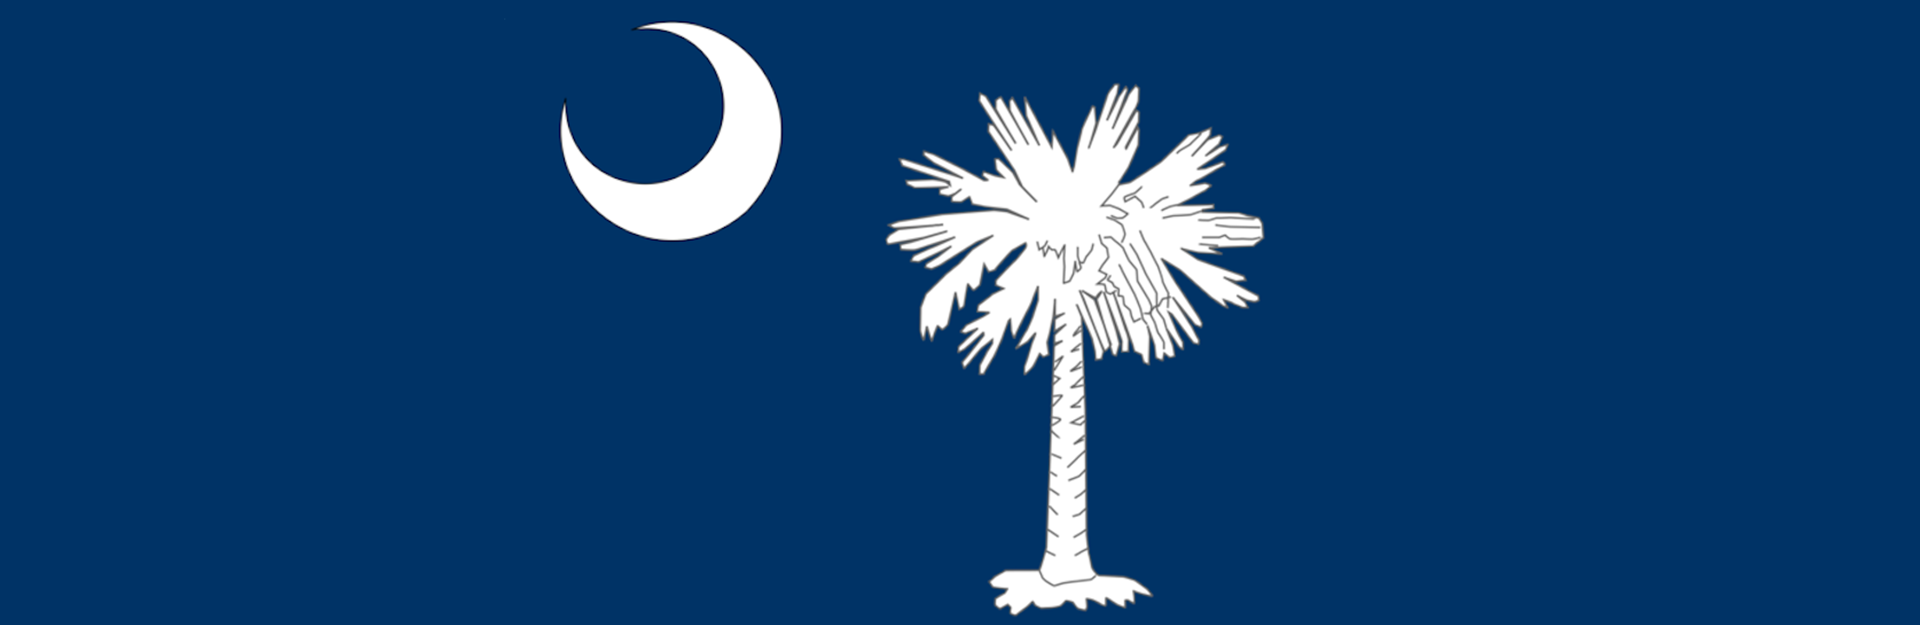 Image from State Flag with palmetto tree and crescent moon